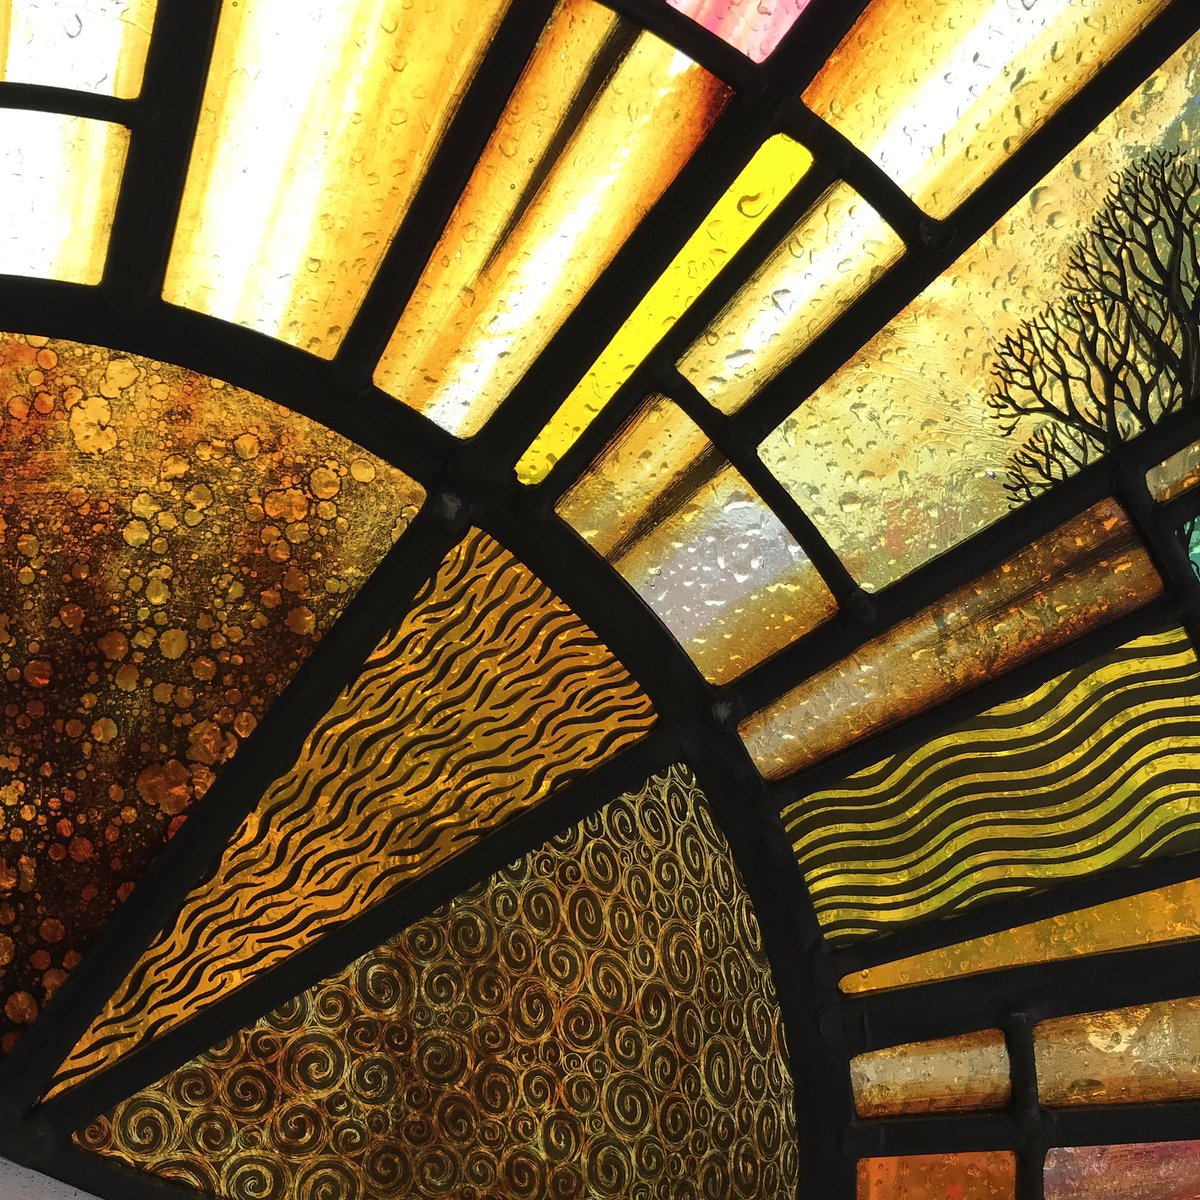 Some nice rainy photos of my ‘sunrise’ panel.it will be heading up to Dumfries after #RHSChatsworth. #stainedglass #moon #sun #reddeer #stag #sunrise